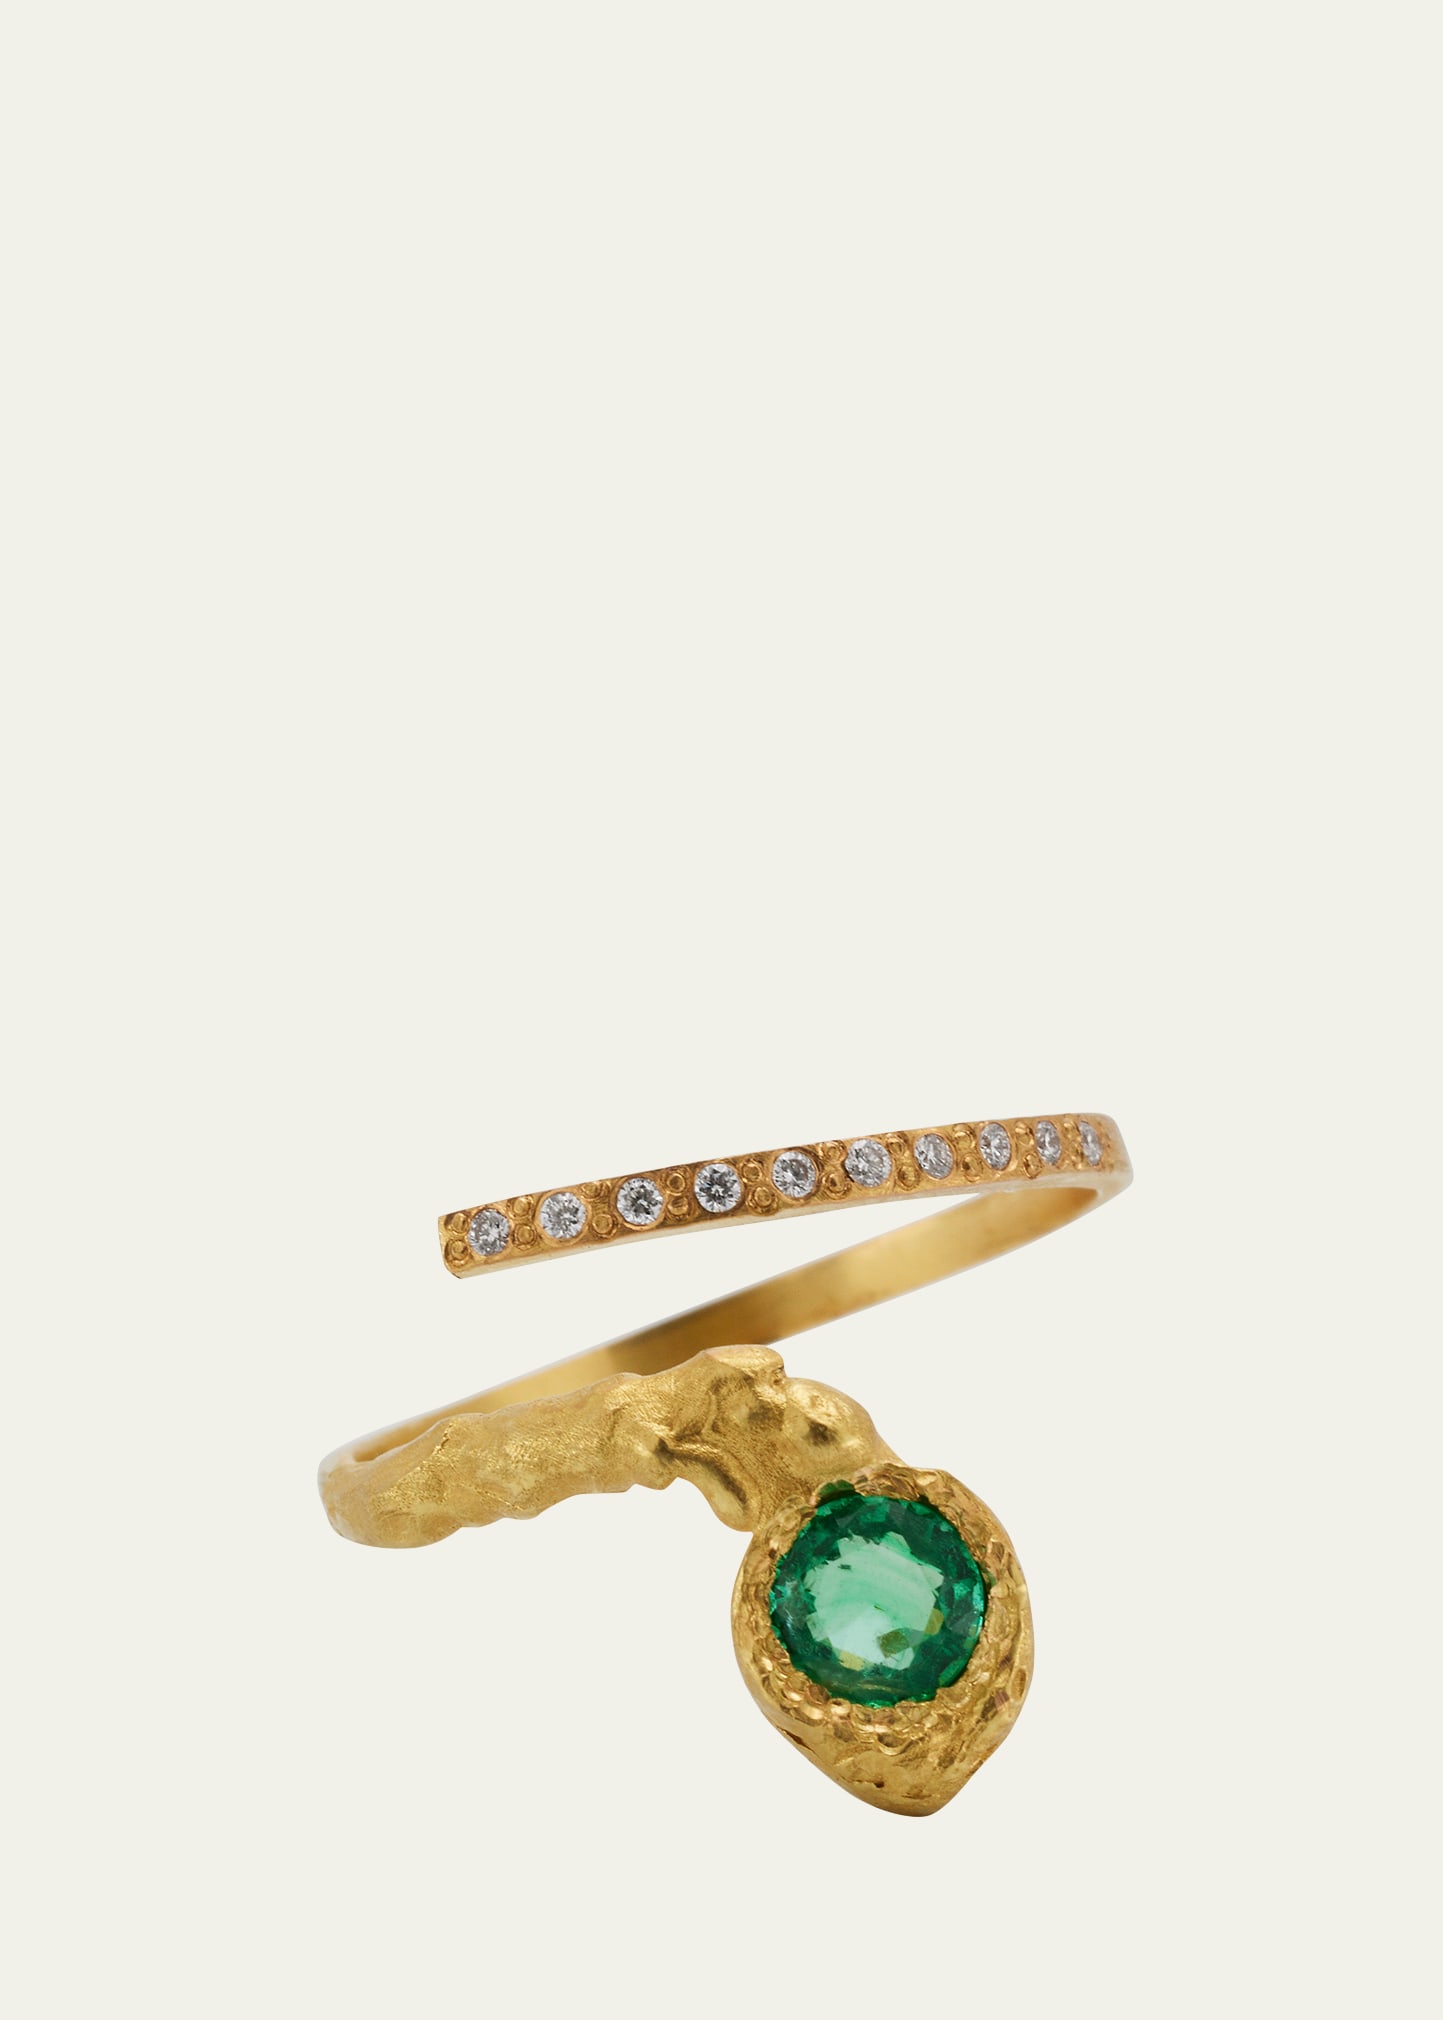 Elhanati Eva Ring in 18K Solid Yellow Gold with 4.4mm Emerald and Top Wesselton VVS Diamonds